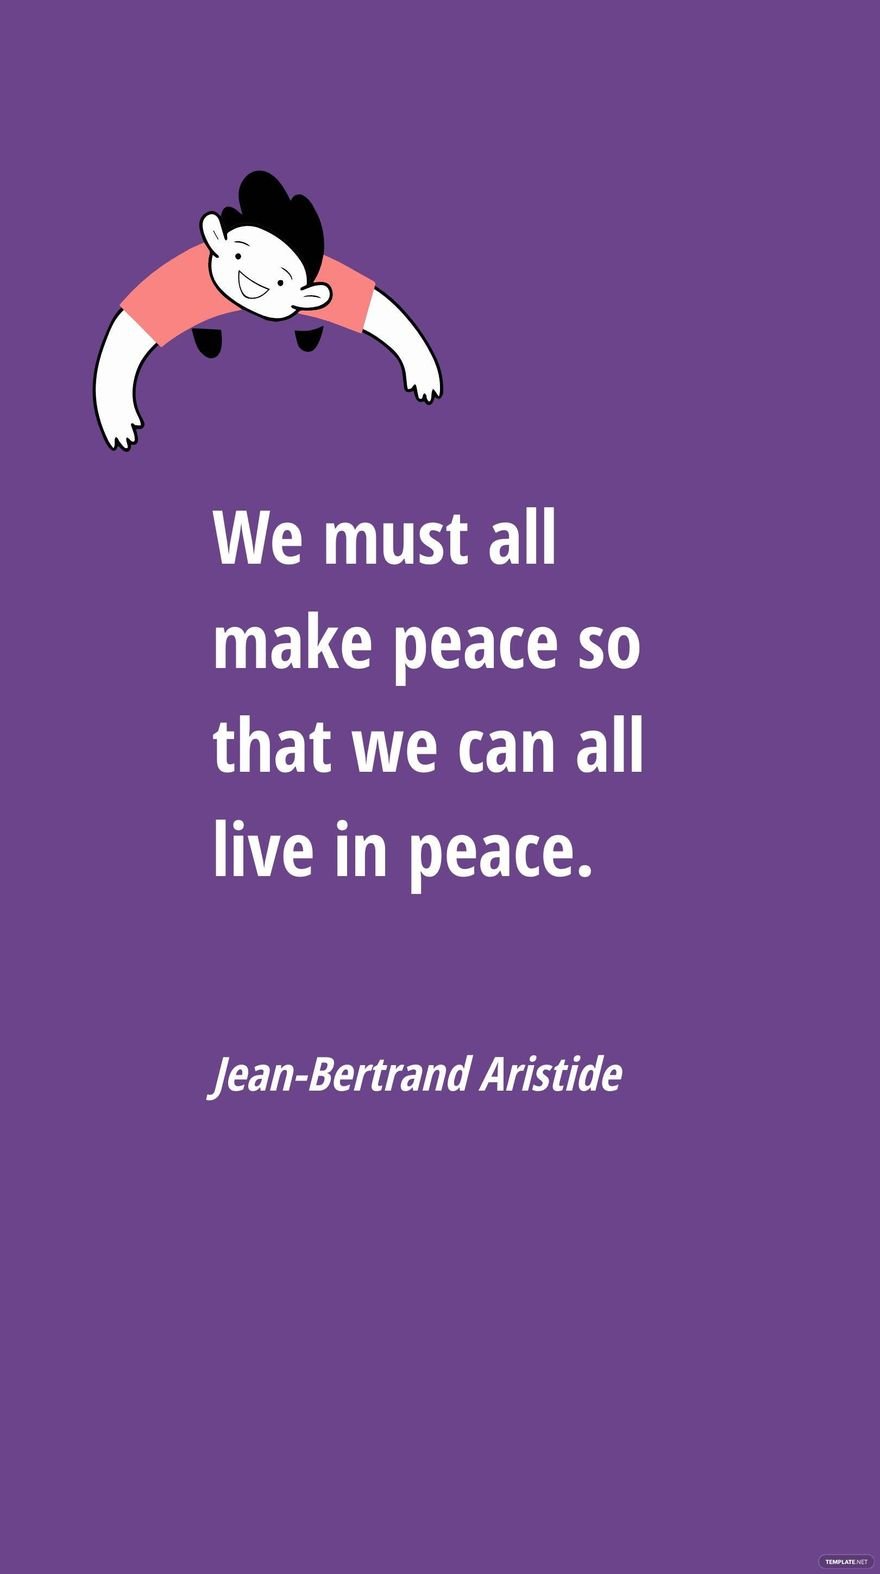 Jean-Bertrand Aristide - We must all make peace so that we can all live in peace. in JPG